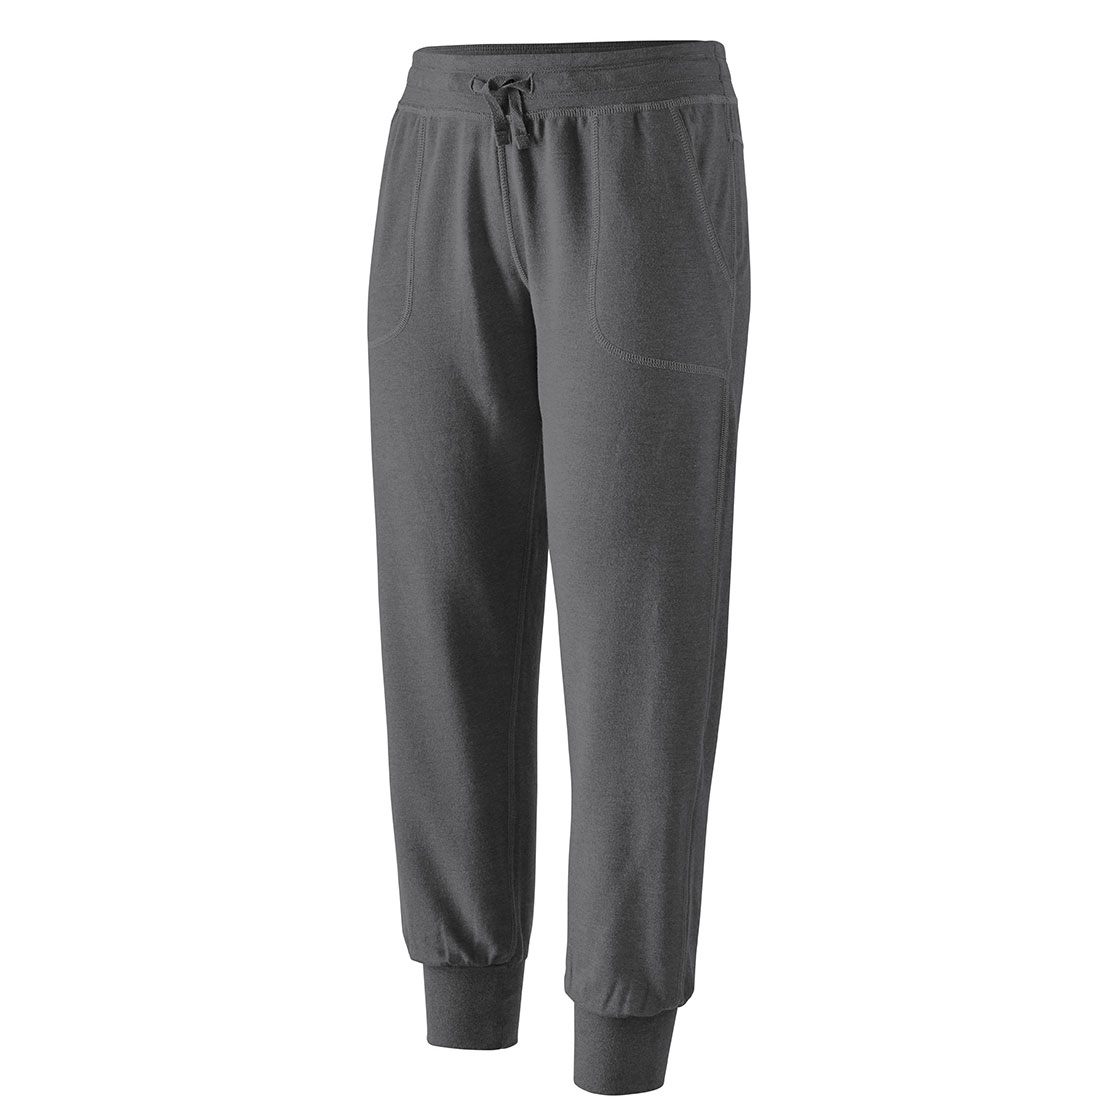 Patagonia Adult Forge Grey Fitted Ahnya Pants